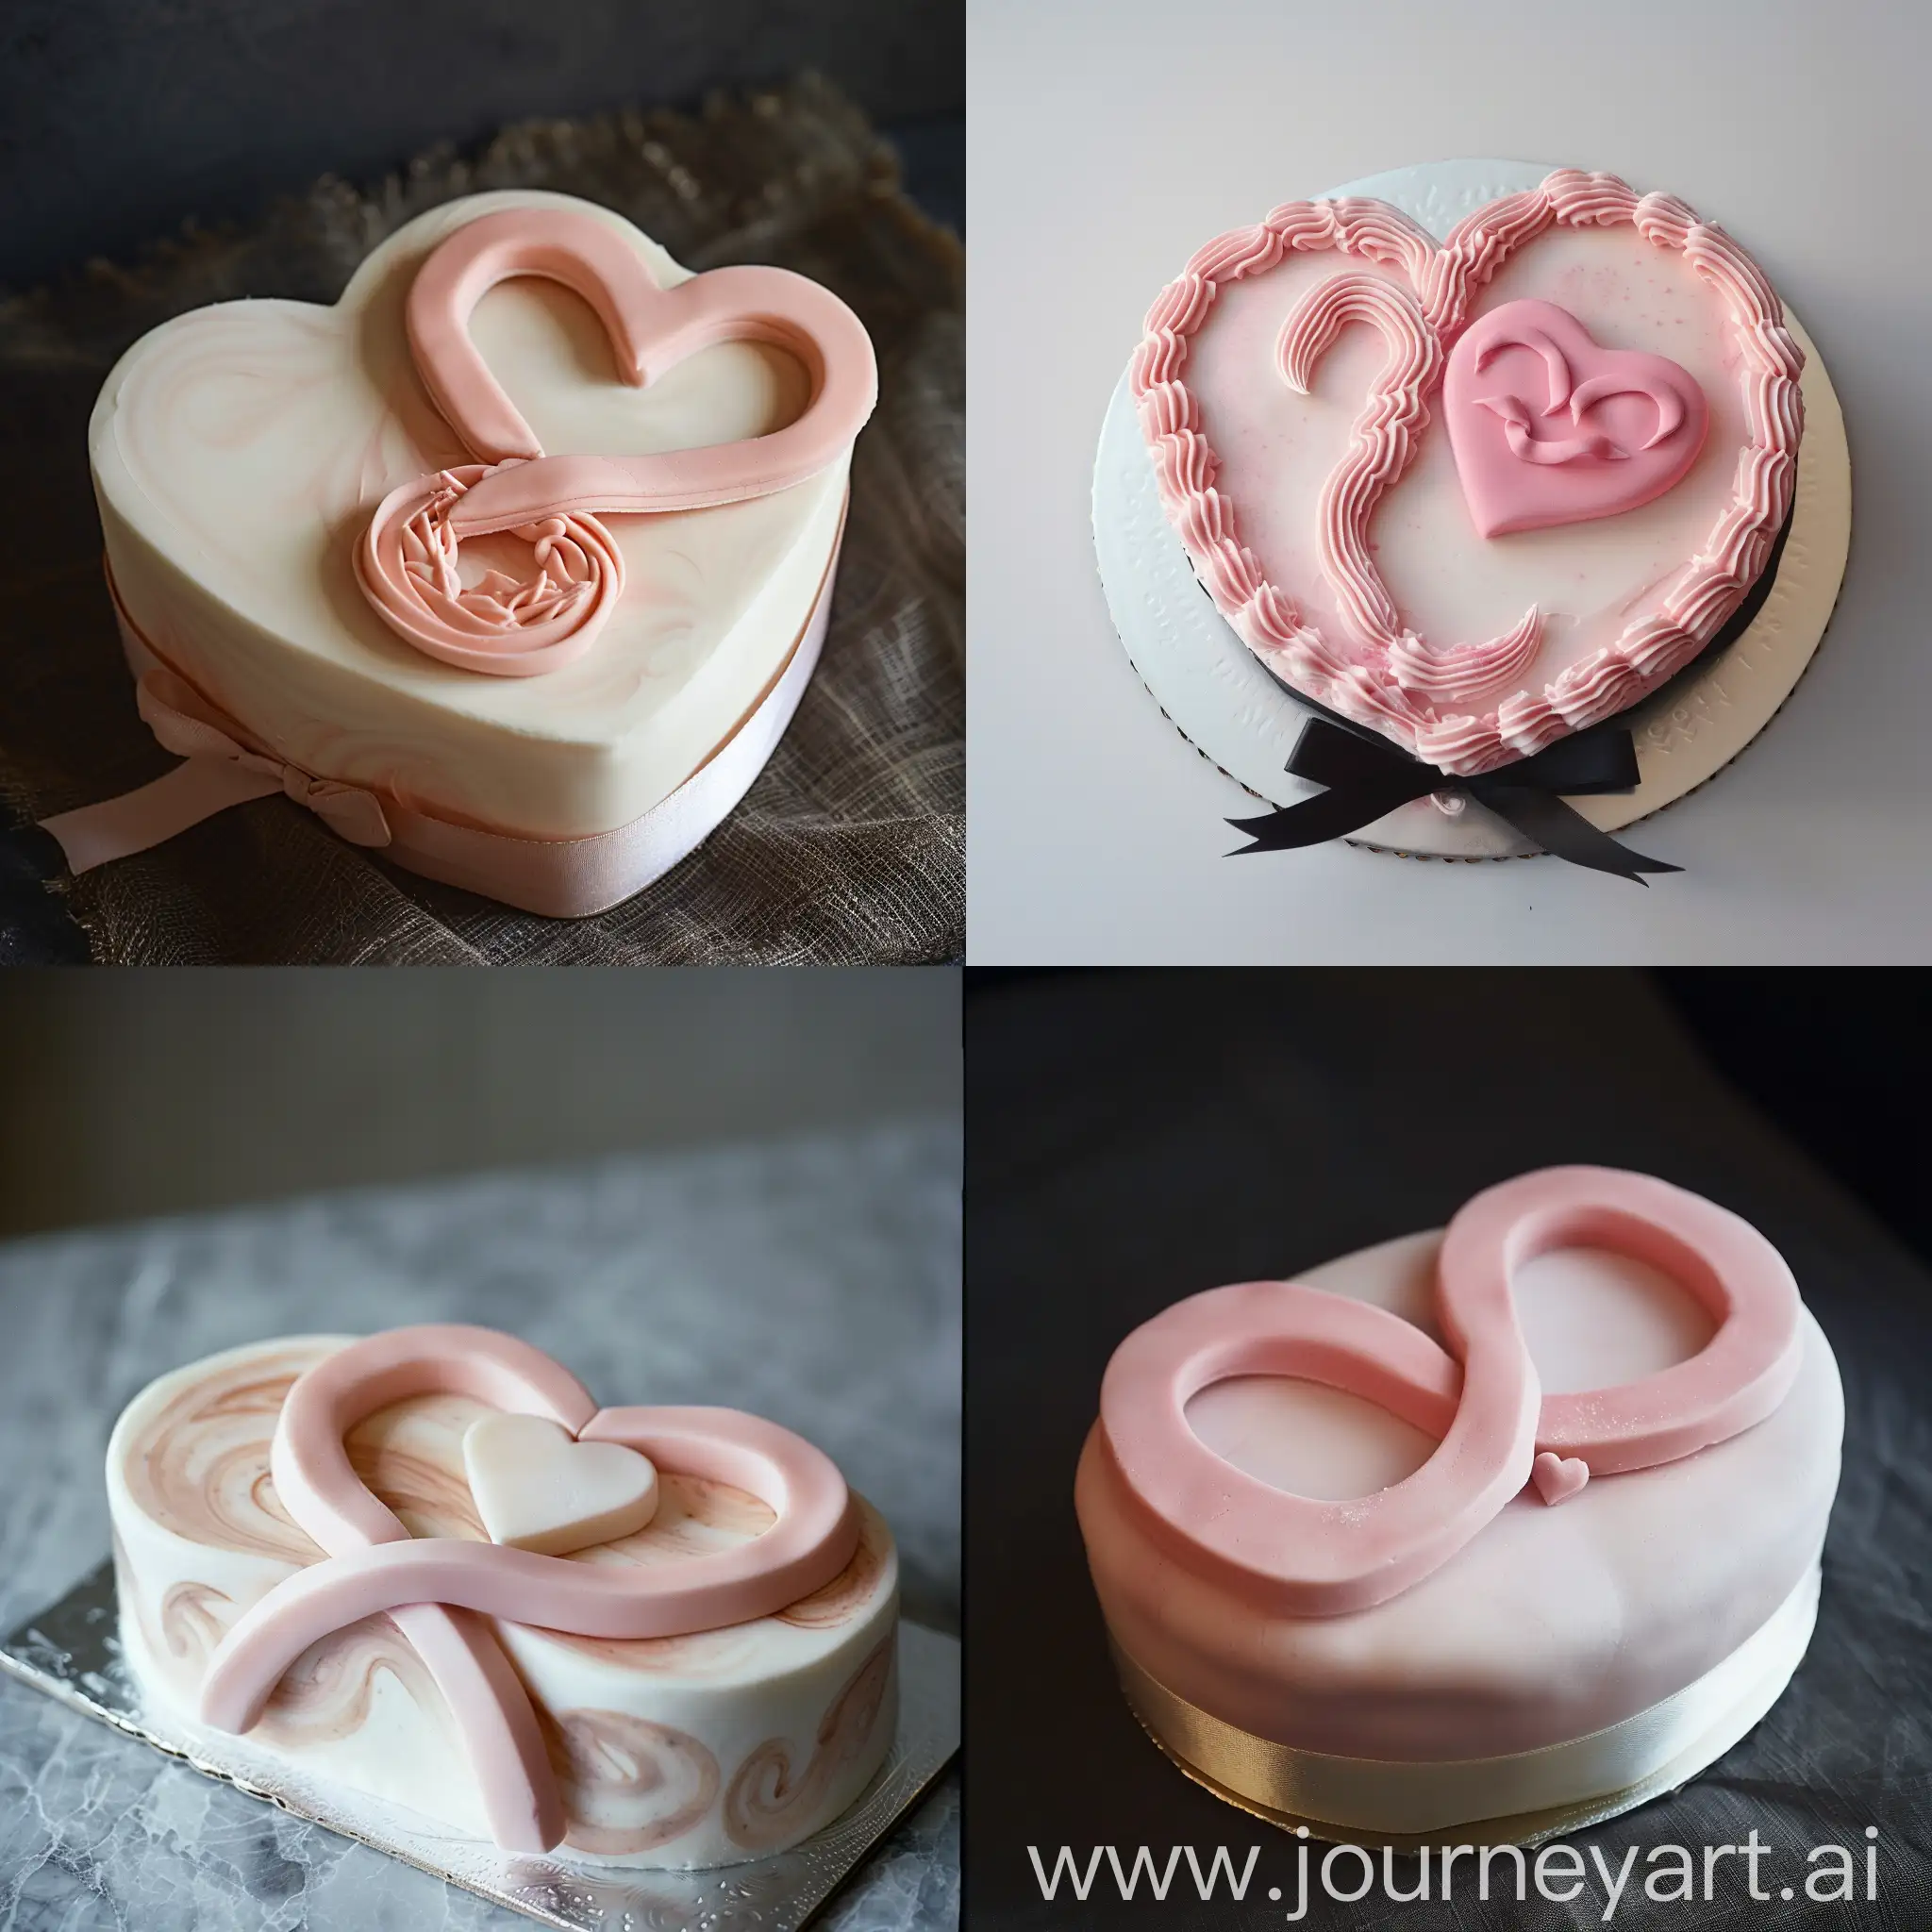 Delicate-HeartShaped-Cake-with-Interlocking-Pink-Hearts-and-Infinity-Symbol